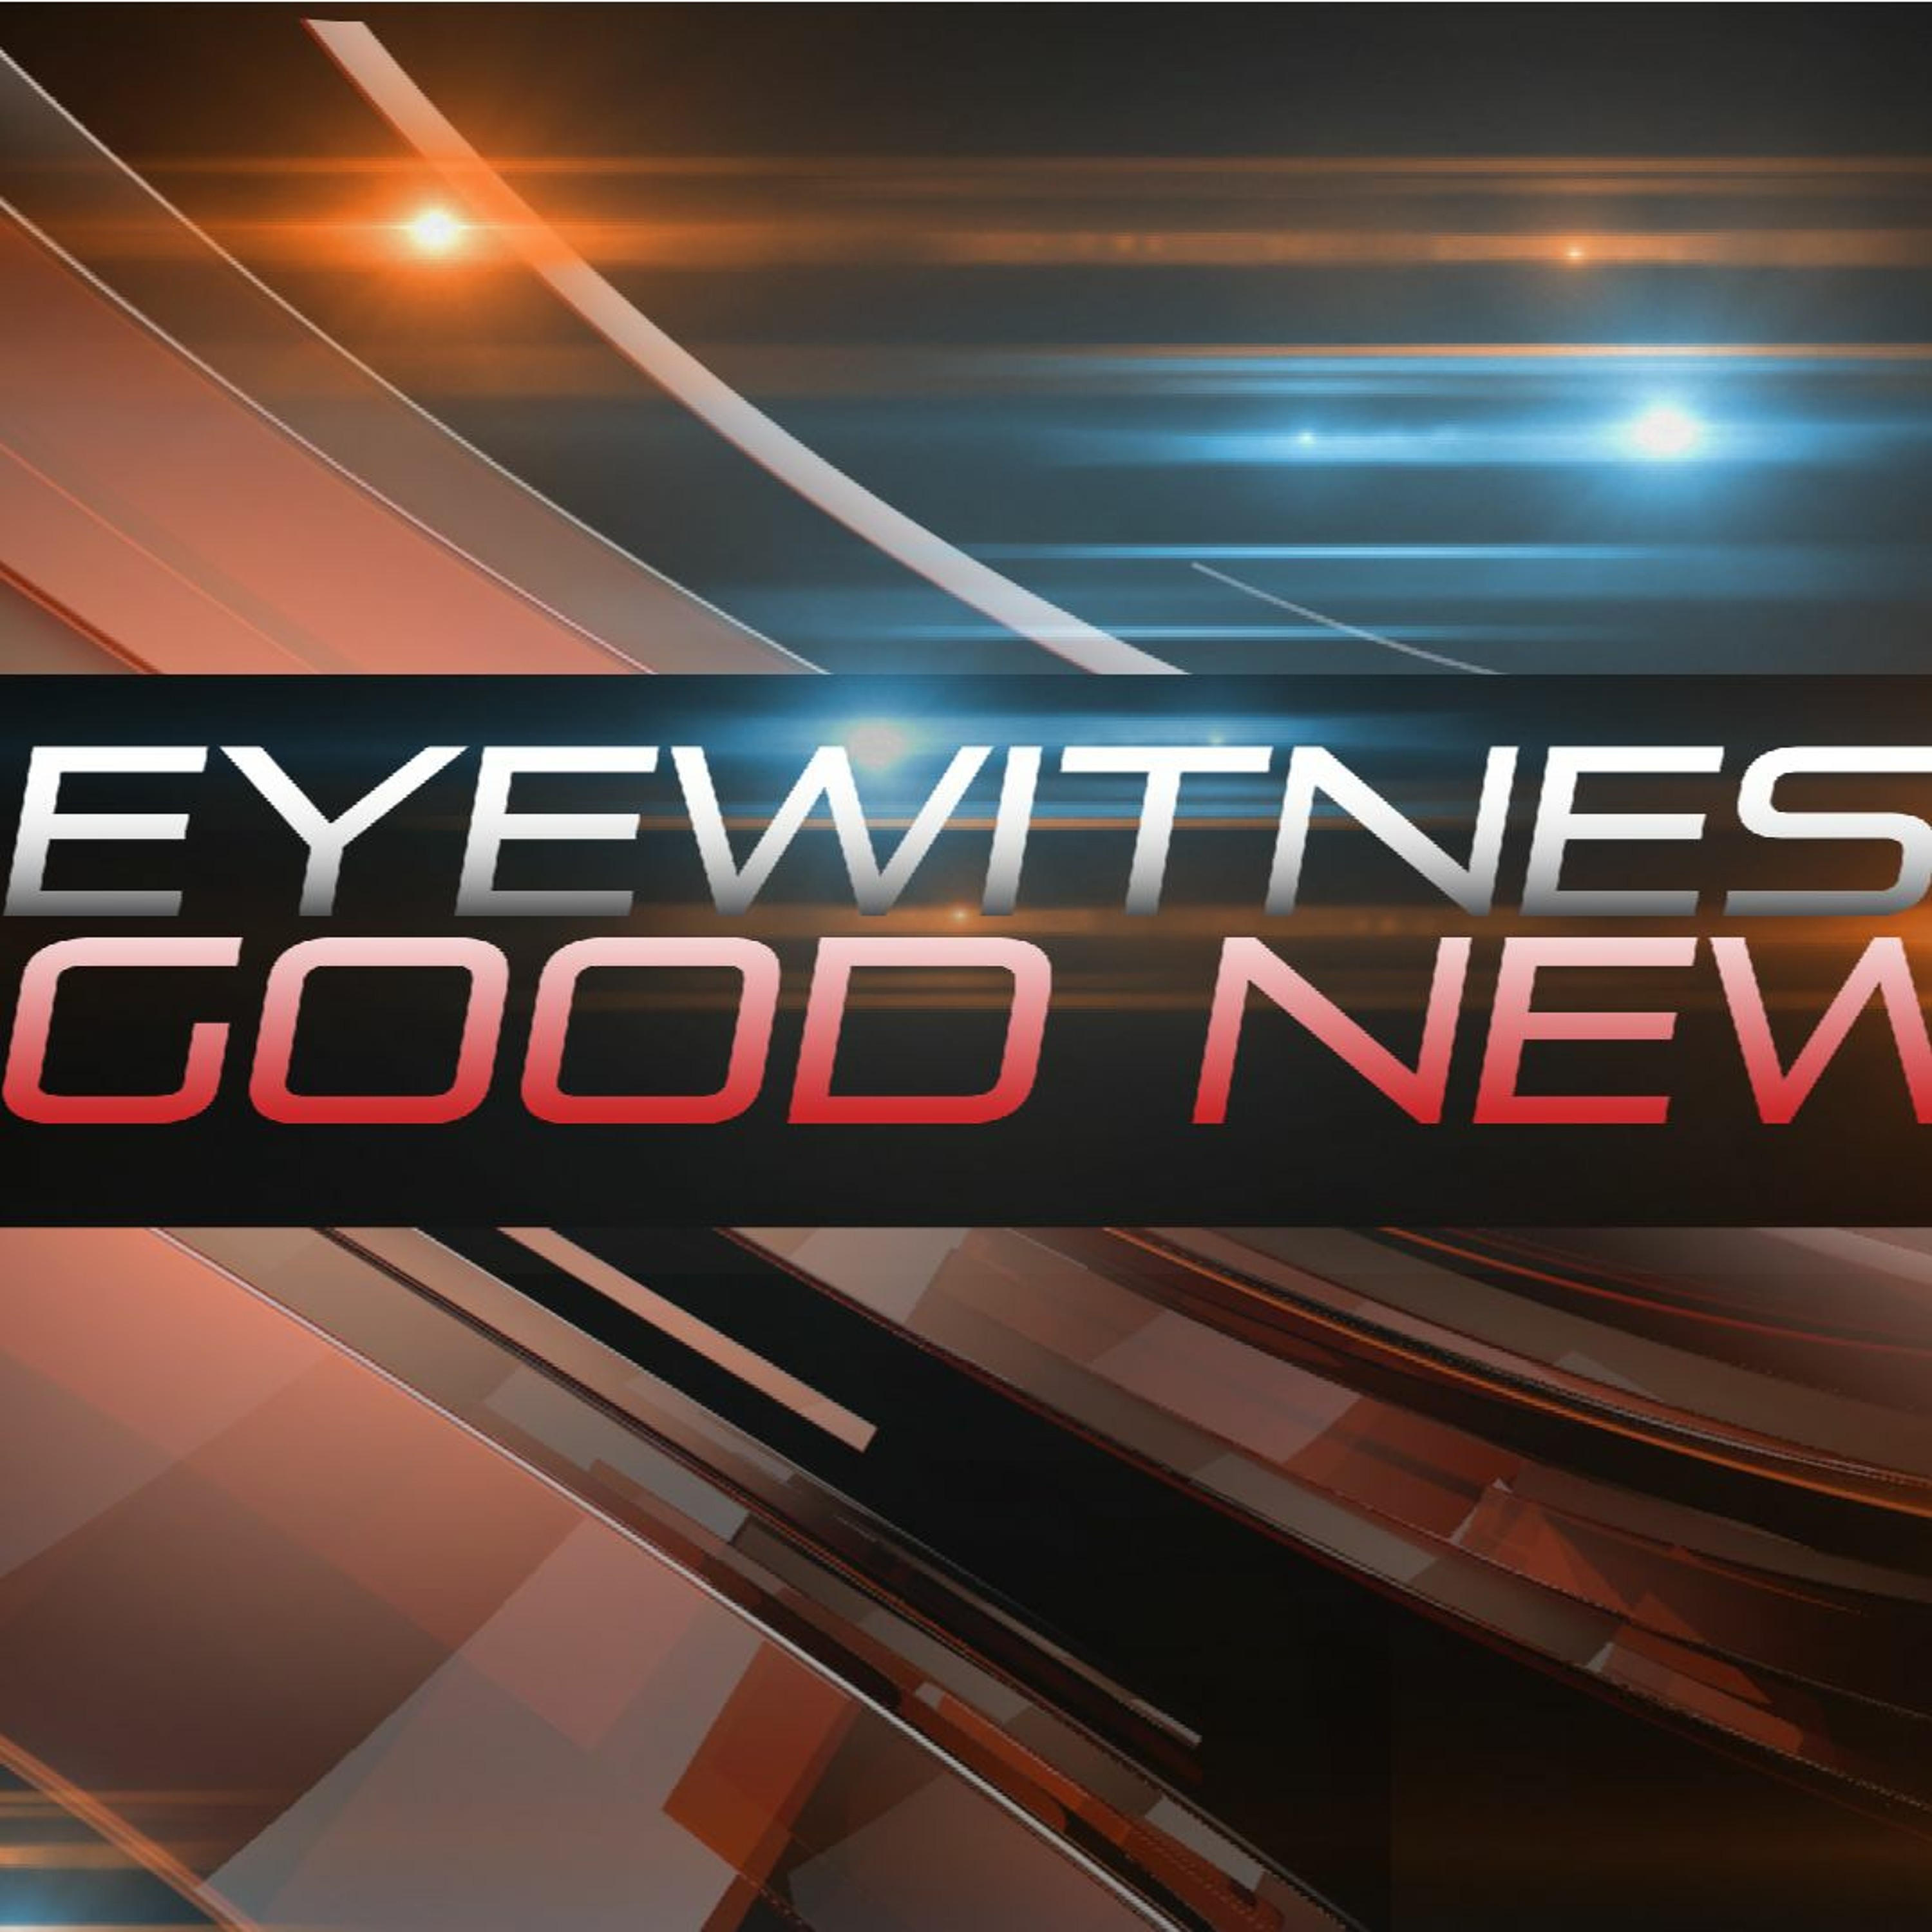 Fulfilled In Your Hearing | Eyewitness Good News | Ethan Magness